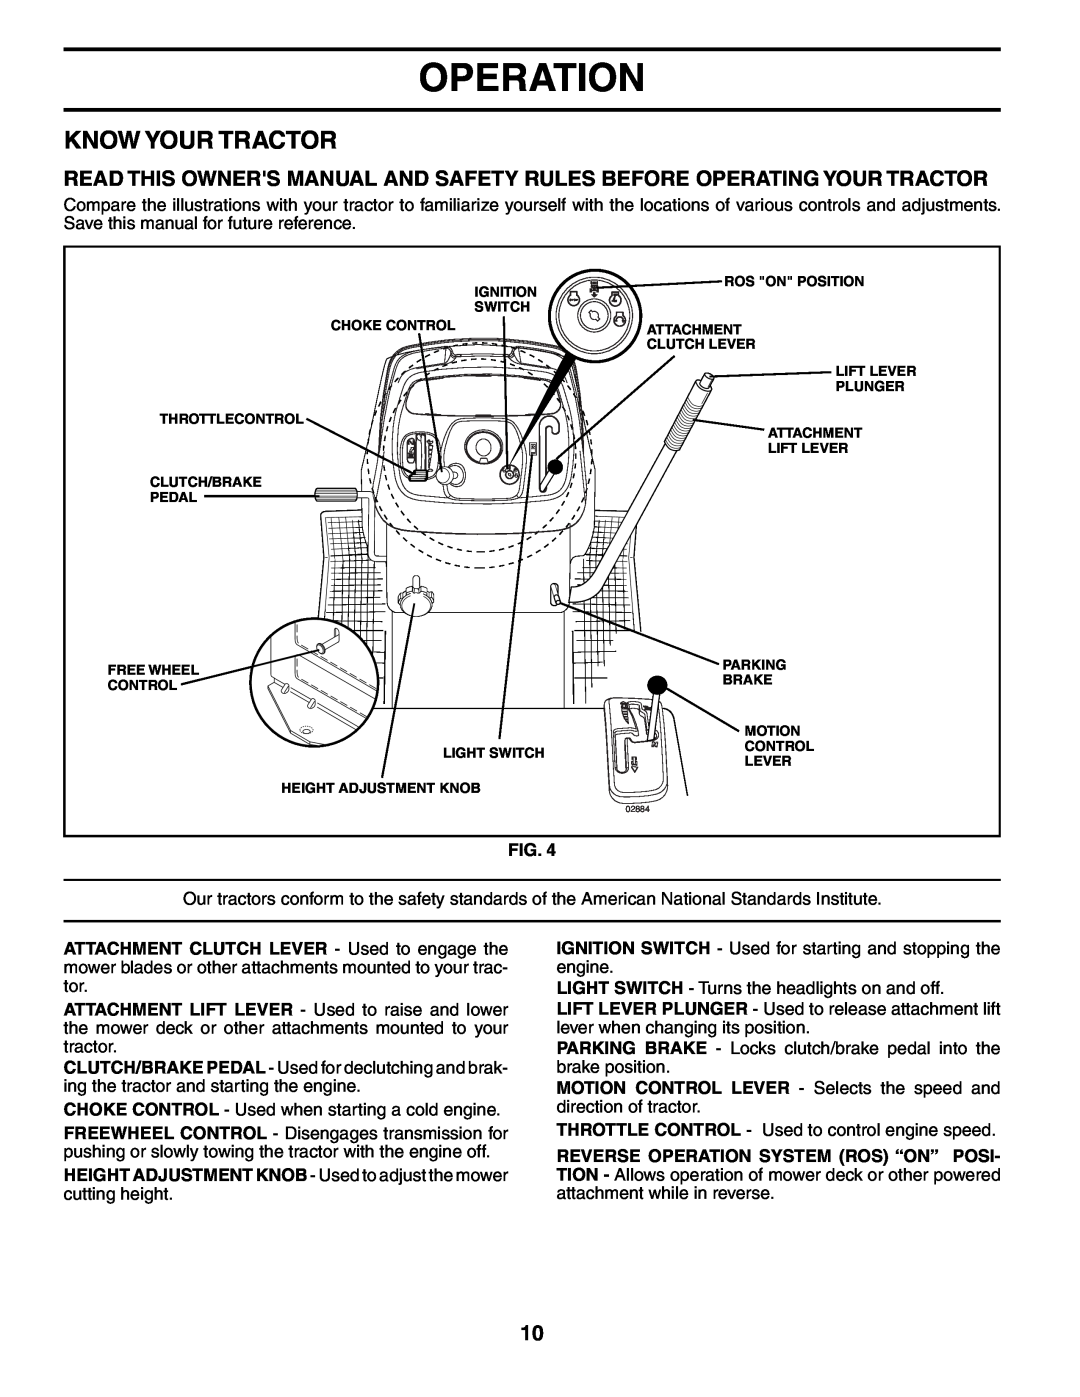 Poulan 196085 manual Know Your Tractor, Operation, HEIGHT ADJUSTMENT KNOB - Used to adjust the mower cutting height 